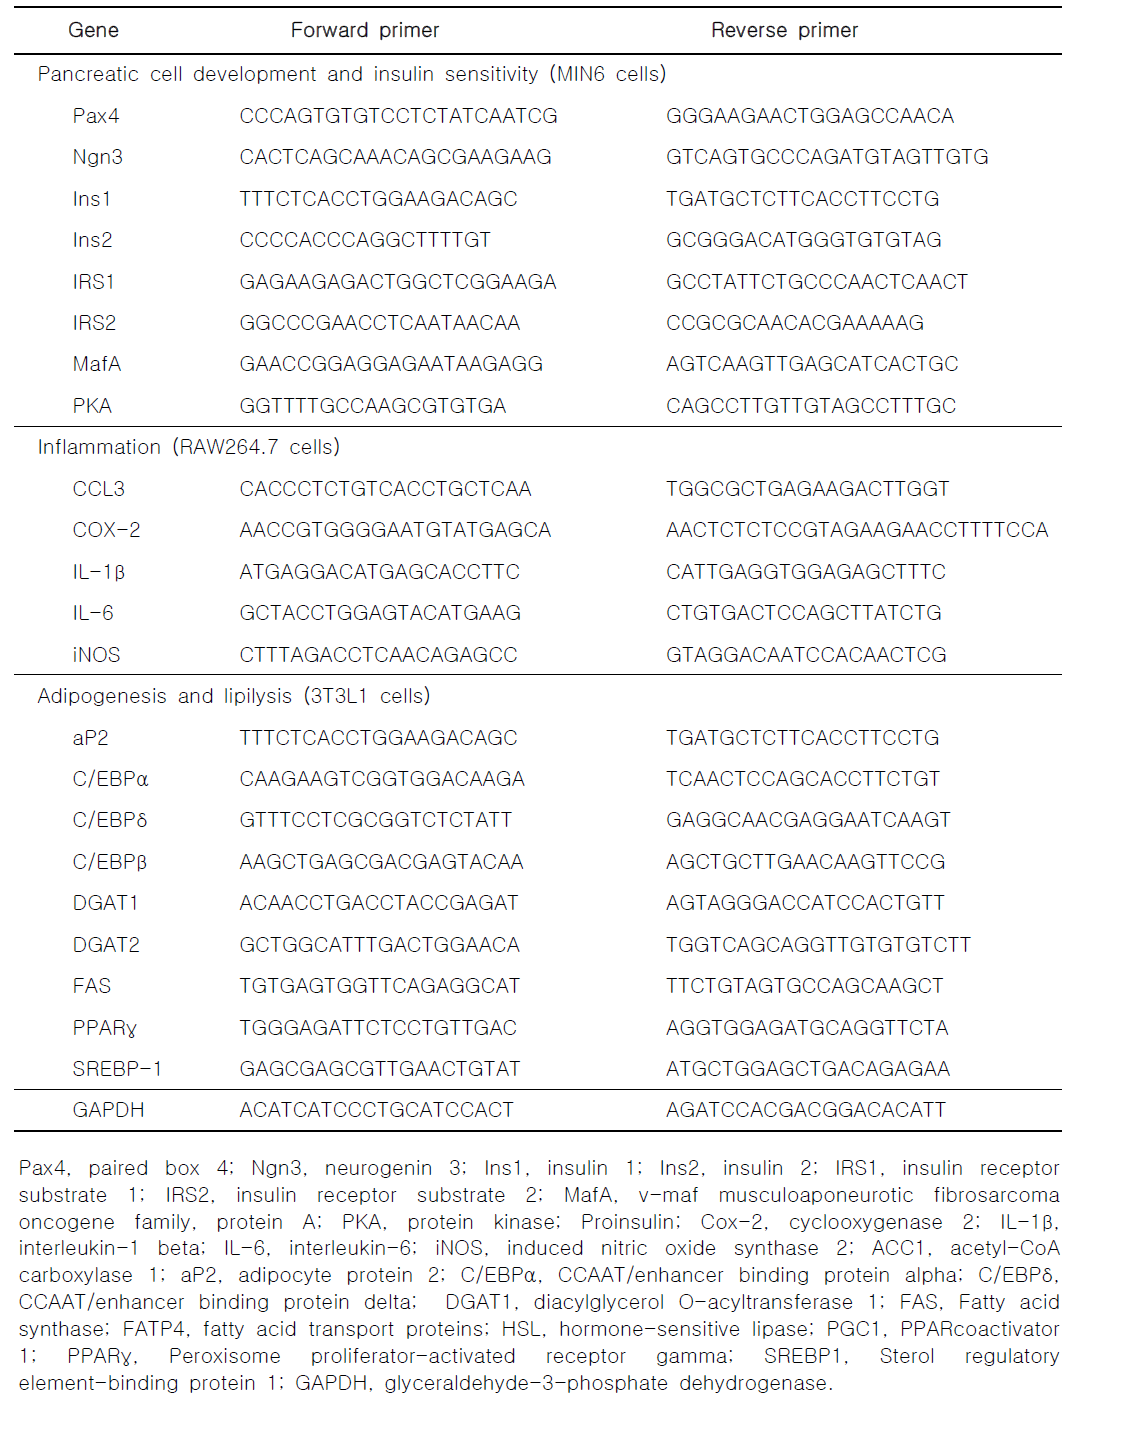 Sequences of primer used for real-time qRT-PCR